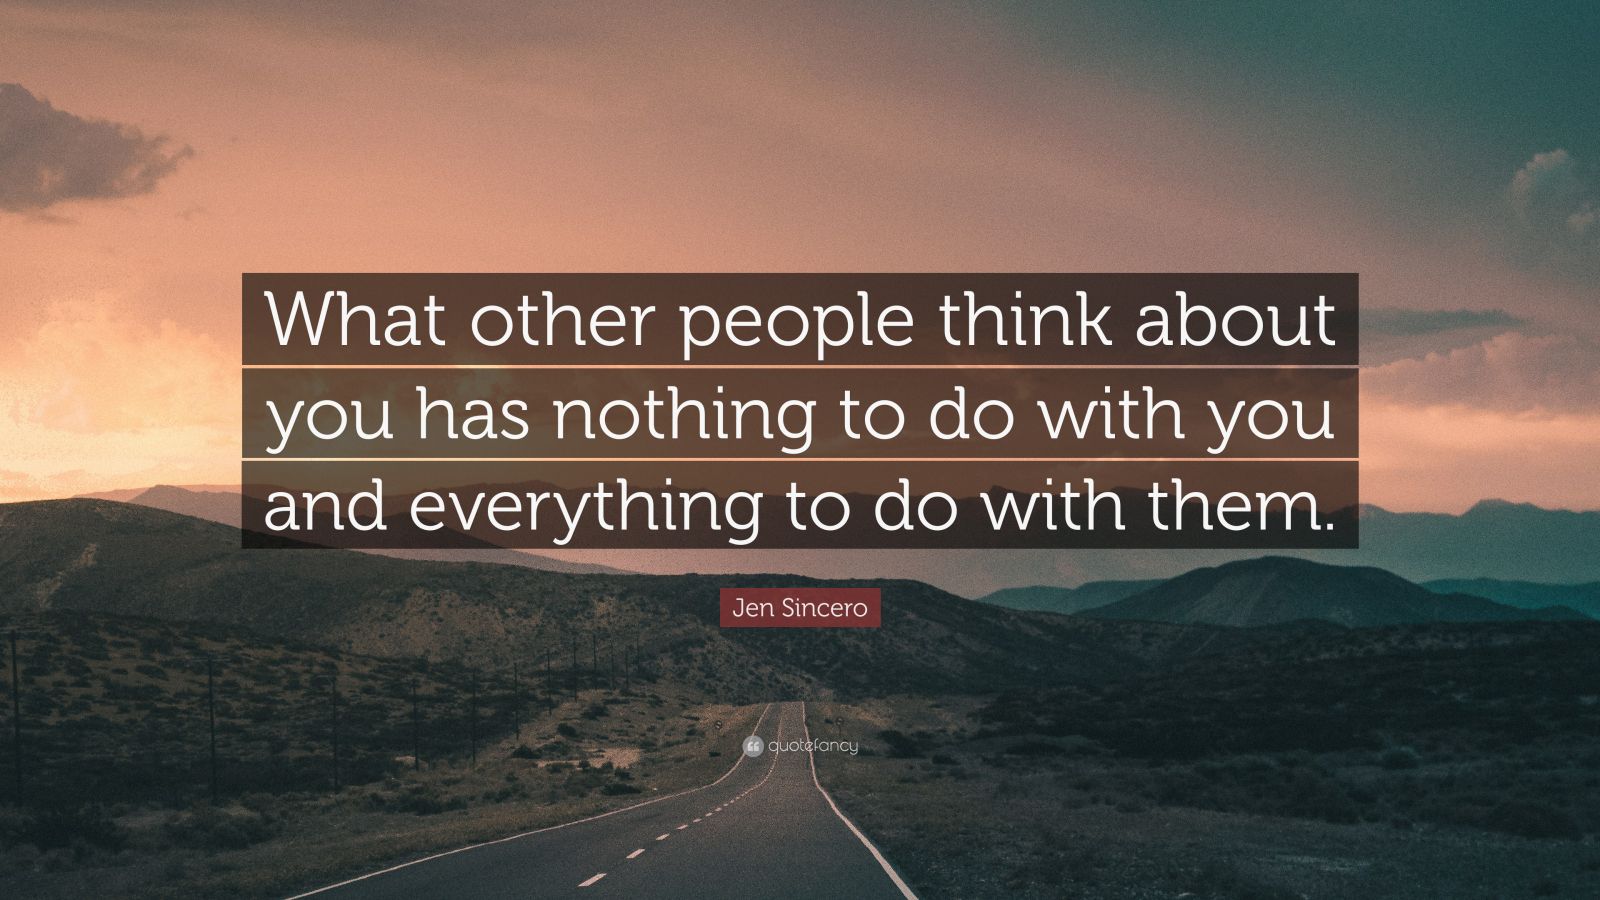 Jen Sincero Quote: “What other people think about you has nothing to do ...